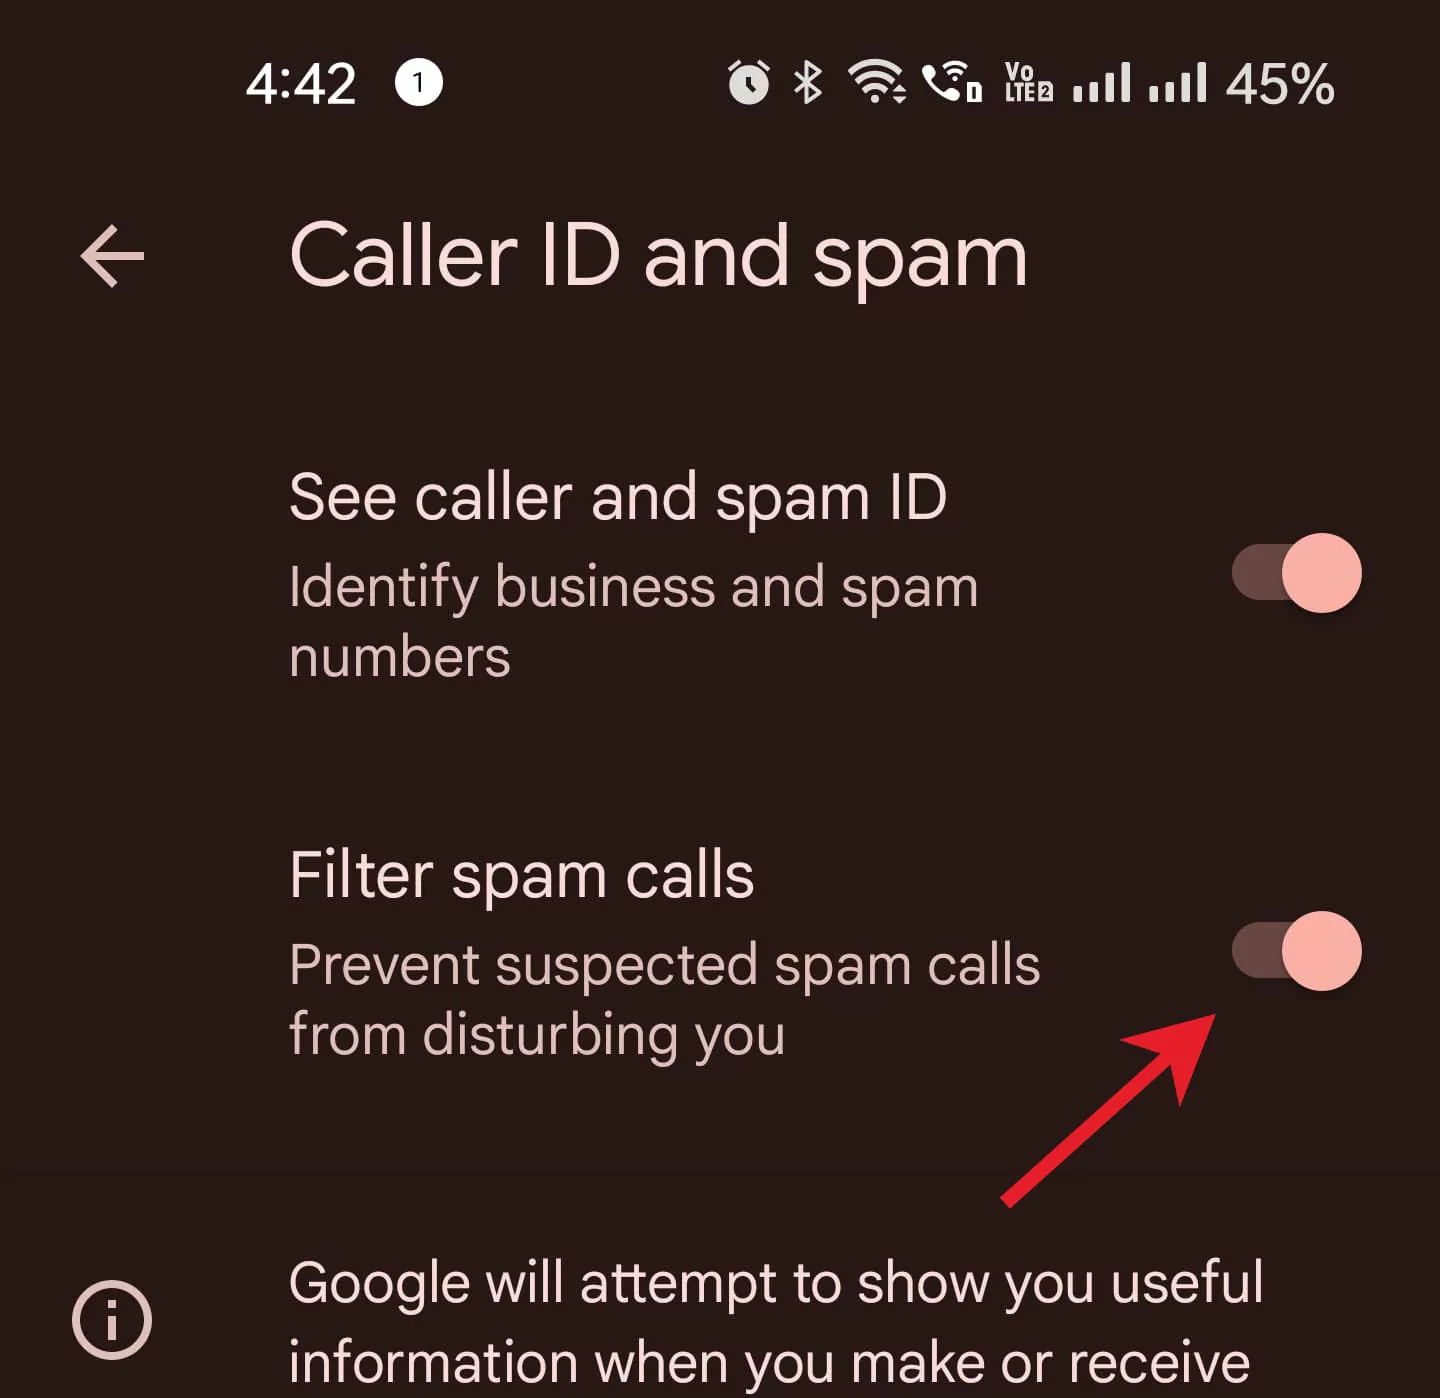 enable filer spam call on android phone app